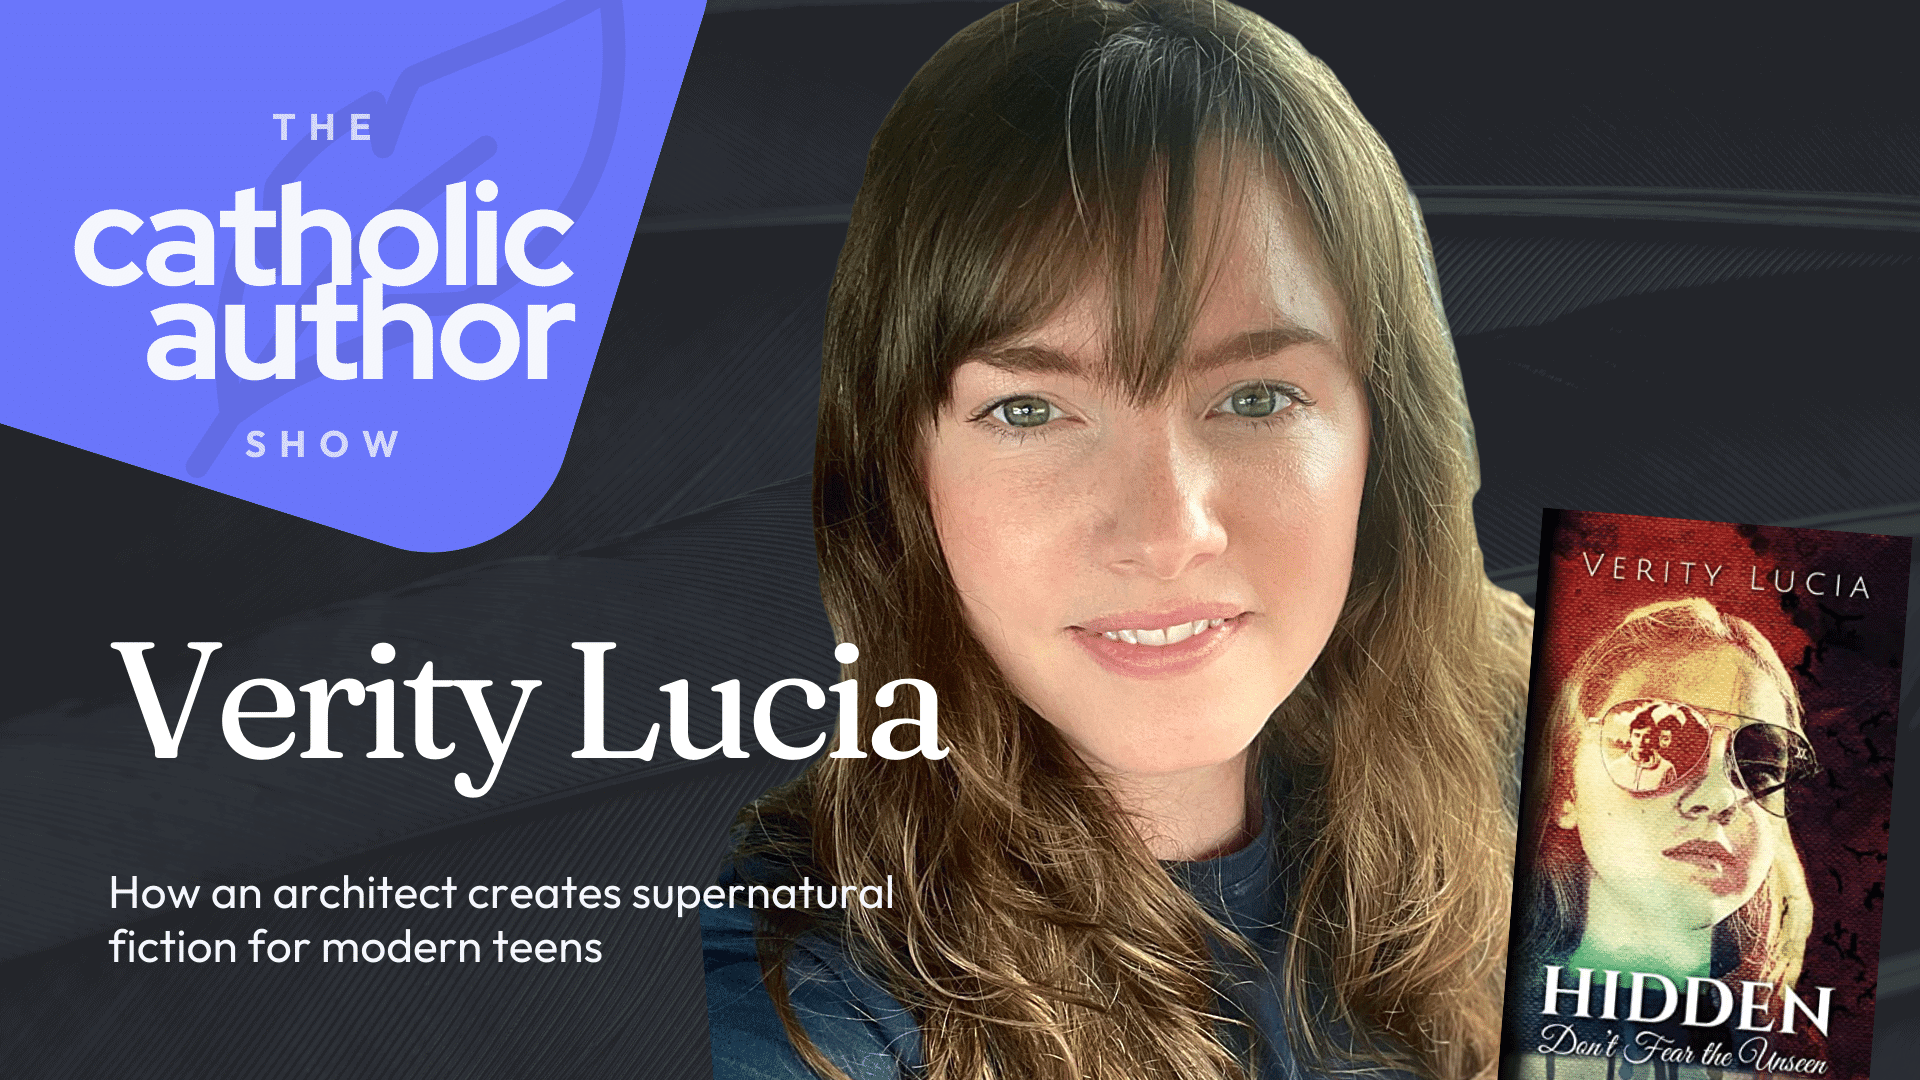 How an architect creates supernatural fiction for modern teens, with Verity Lucia